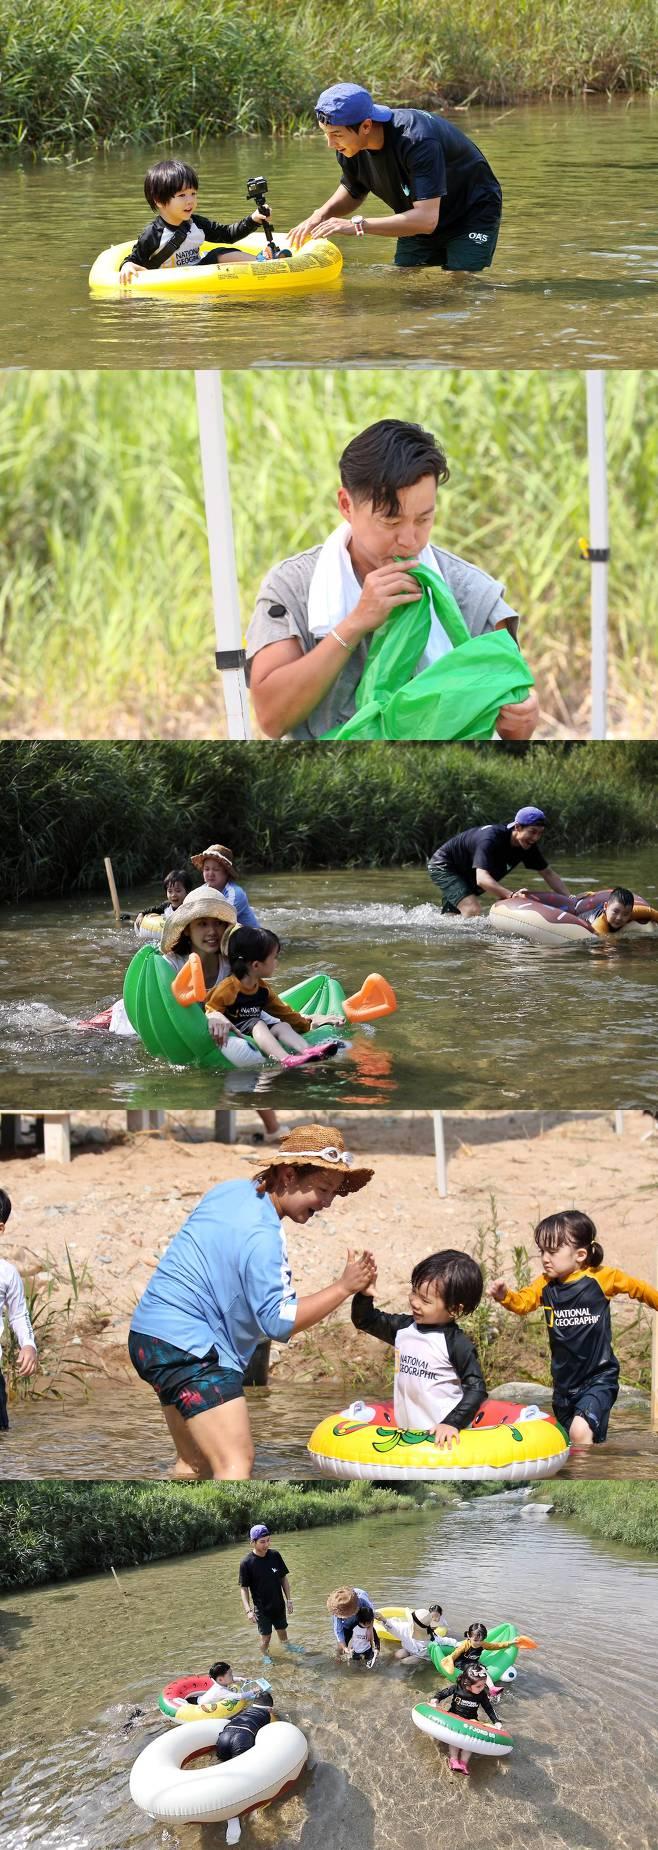 In the SBS Wall Street Arts Little Forest: Summer of the Bakgol (hereinafter referred to as Little Forest), which will be broadcast on September 2, the Valley water play scene of Lee Seo-jin, Lee Seung-gi, Park Na-rae, Jeong So-min and Little Lee will be released.Recently members and Little Lee (children) left for Valley for a water play.Unlike the concern that water play would be unfamiliar, one little girl surprised the members by doing preparations for herself before entering the water.In addition, the members struggle to reassure Little Lee, who is familiar with urban life, attracted attention.In particular, Lee Seo-jin showed off his previous lung capacity by constantly blowing wind into the constant tube orders of Little.In addition, Lee Seung-gi proposed a game while enjoying water play, and Little people chose the team directly, and the popular vote of the members naturally proceeded.The members waited for the Choices of the Littles with the mind of the worried group, and the members joy and sorrow were crossed whenever the Choices continued.Unlike the fierce first and second place fights, the last place was born, which can be confirmed through broadcasting.Meanwhile, there are situations in which the farts echoed in Valley, which raise the question of who the real killer of the fart was, as the quarrel begins to find the killer.